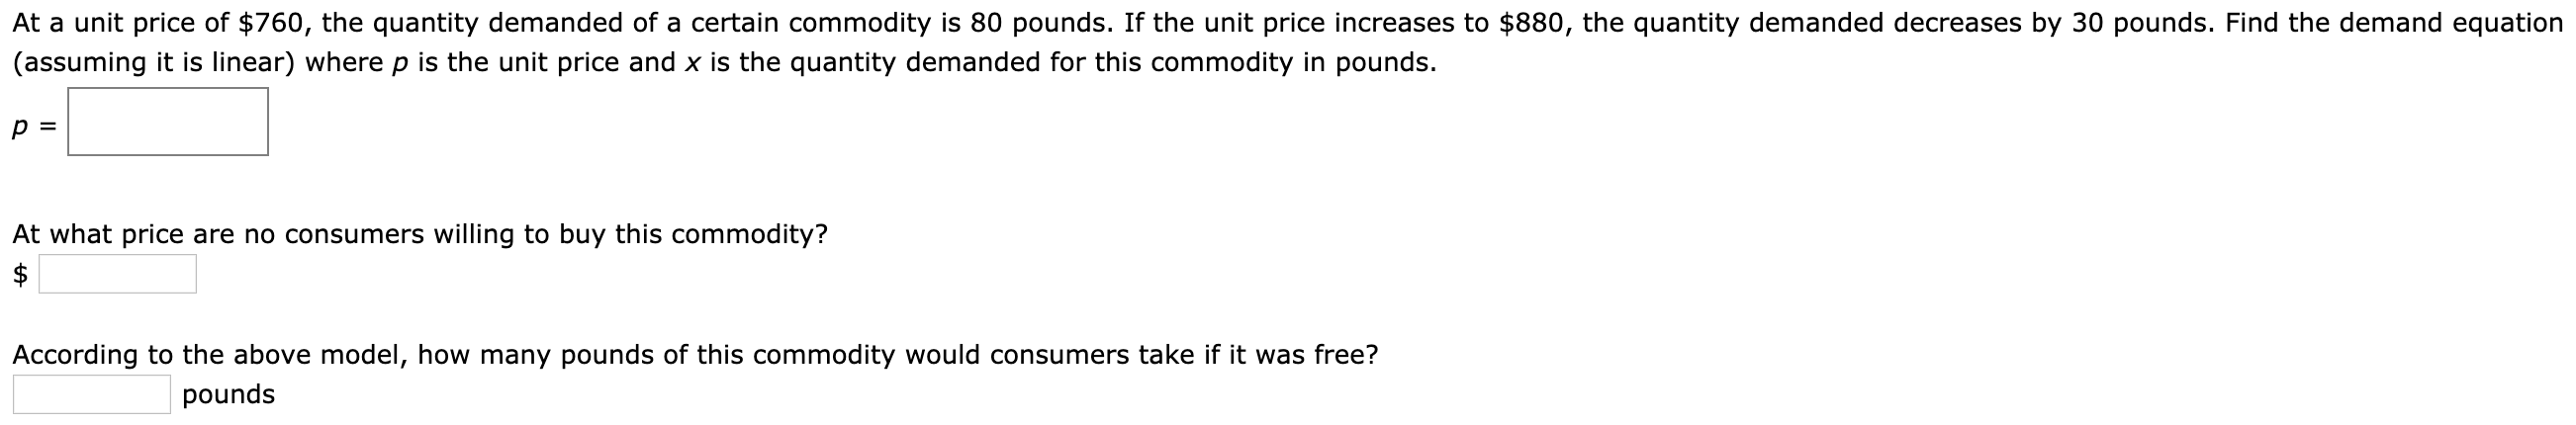 At a unit price of $760, the quantity demanded of a certain commodity is 80 pounds. If the unit price increases to $880, the quantity demanded decreases by 30 pounds. Find the demand equation
(assuming it is linear) where p is the unit price and x is the quantity demanded for this commodity in pounds.
At what price are no consumers willing to buy this commodity?
According to the above model, how many pounds of this commodity would consumers take if it was free?
pounds
